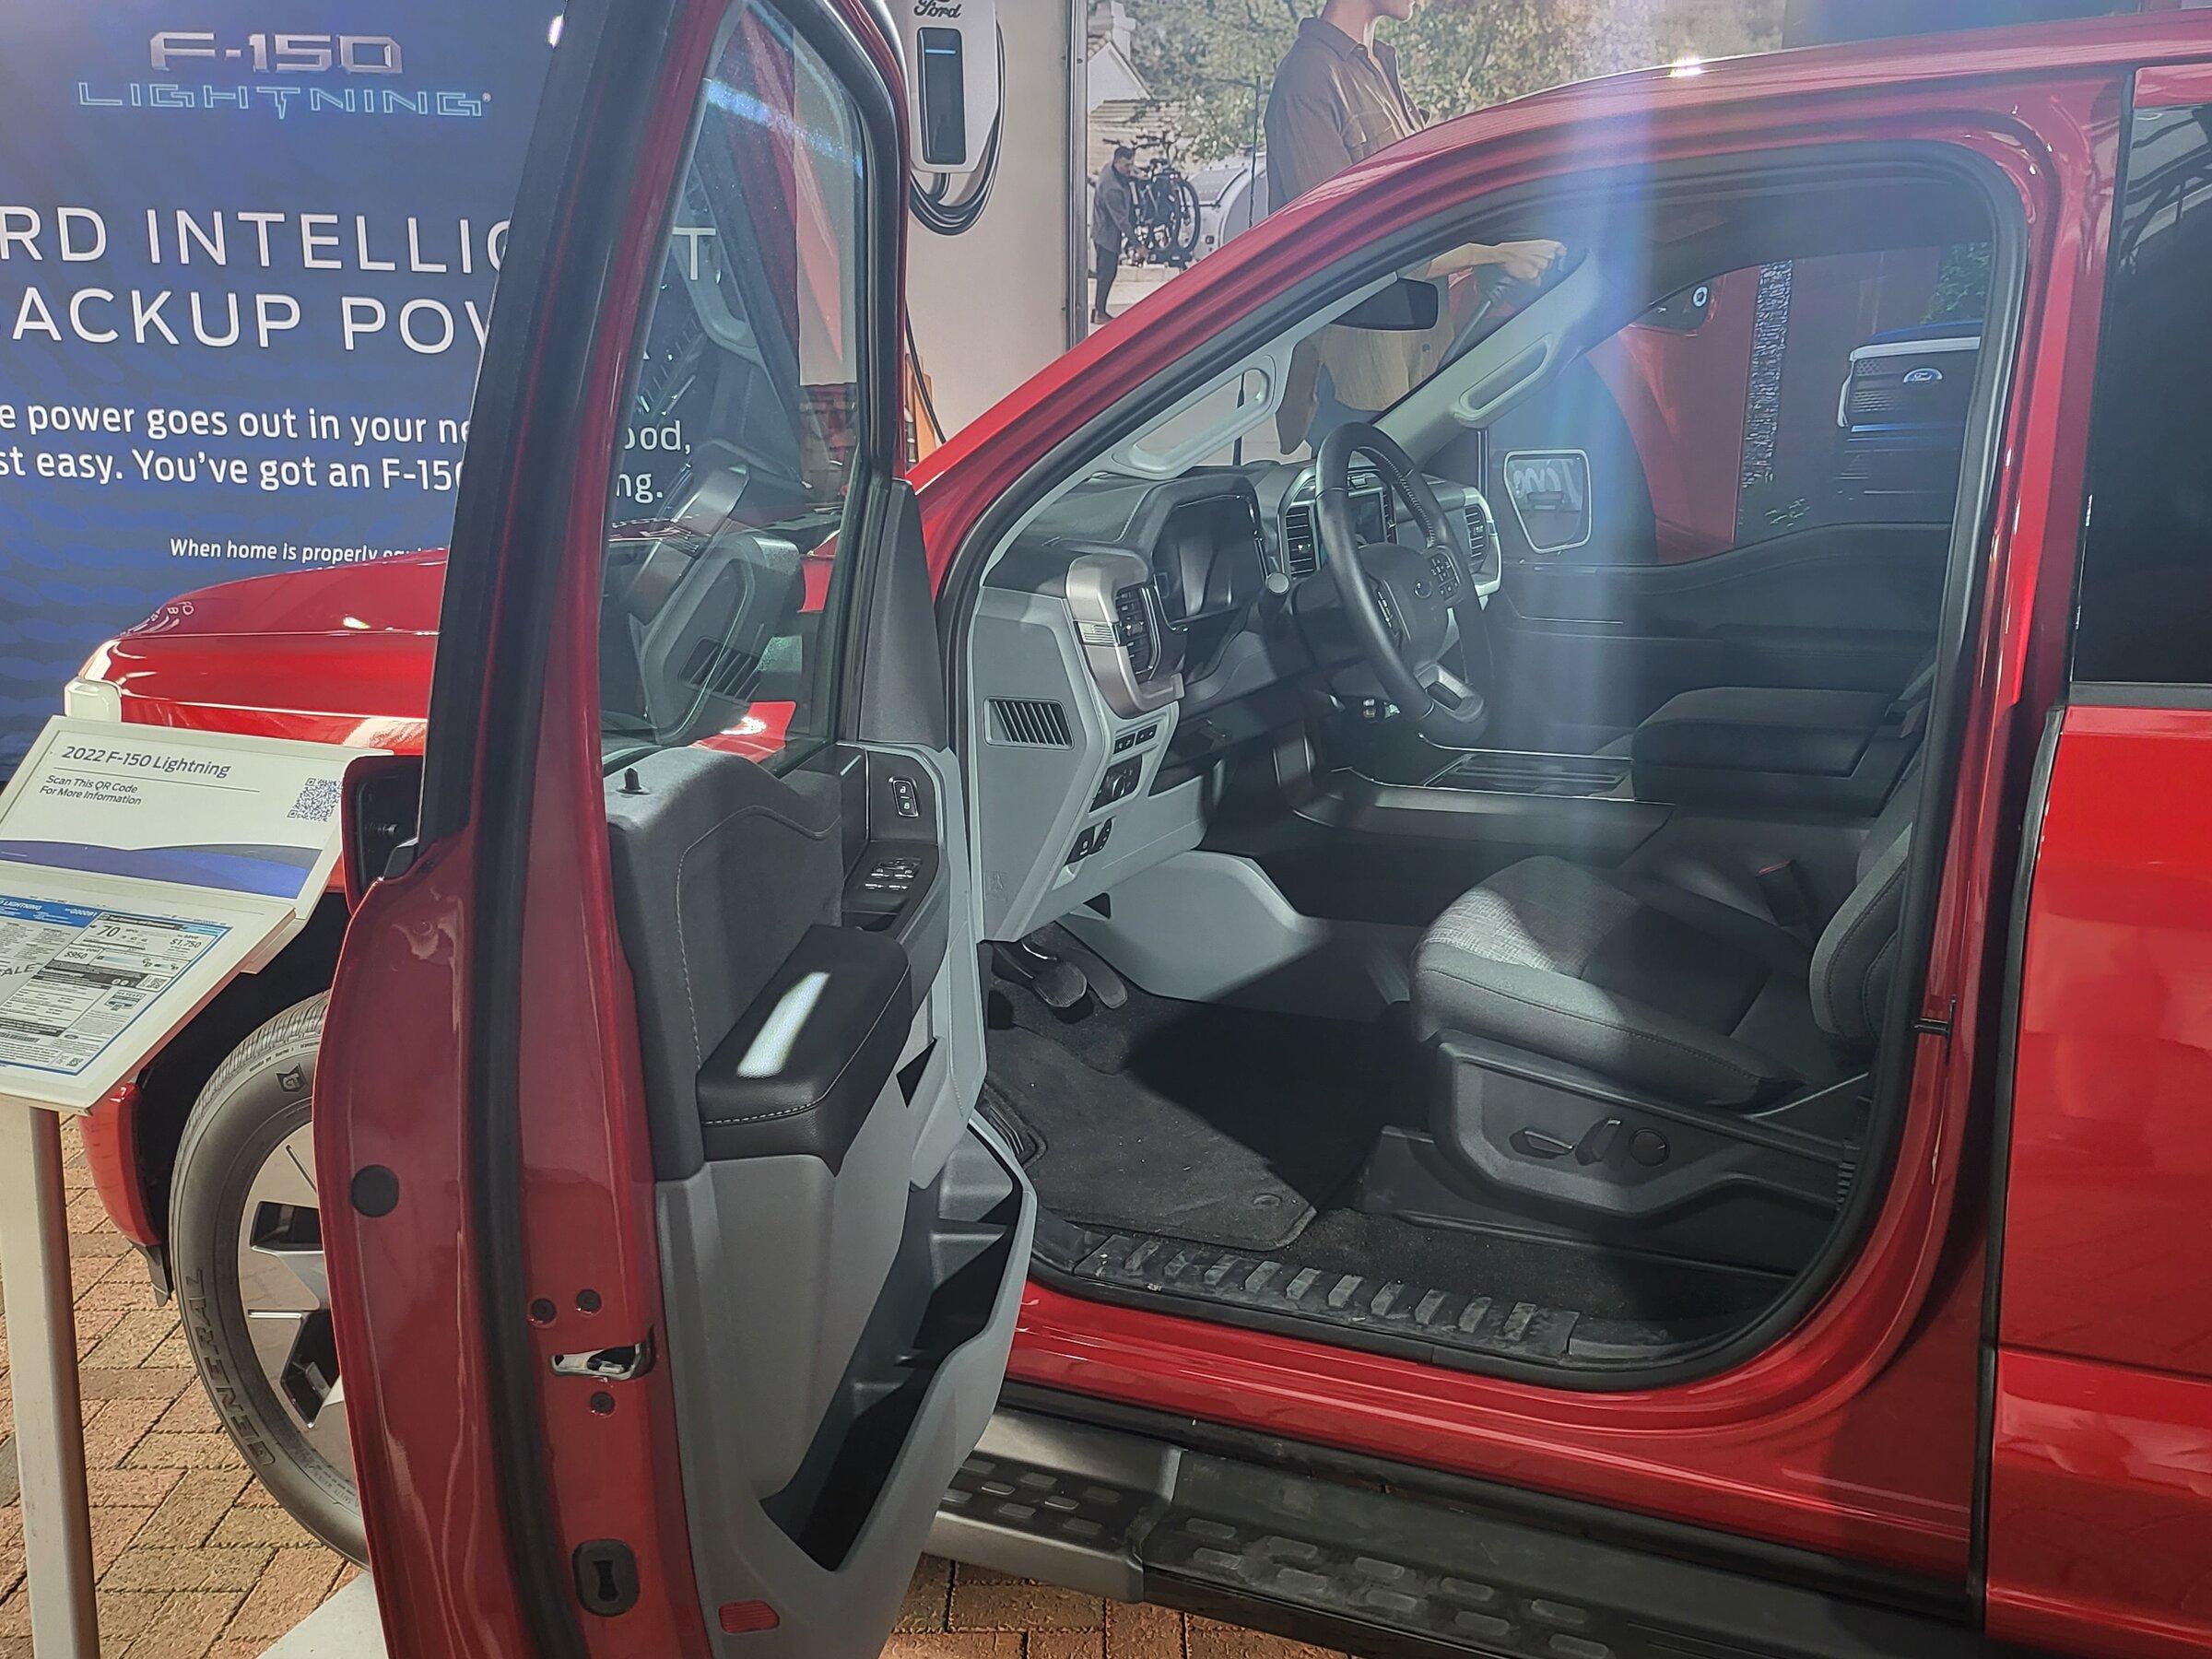 Ford F-150 Lightning In-Person Lightning Impressions - From a XLT Order Holder (w/ Photos & Door Payload Sticker) [San Antonio Event] 20220506_093159